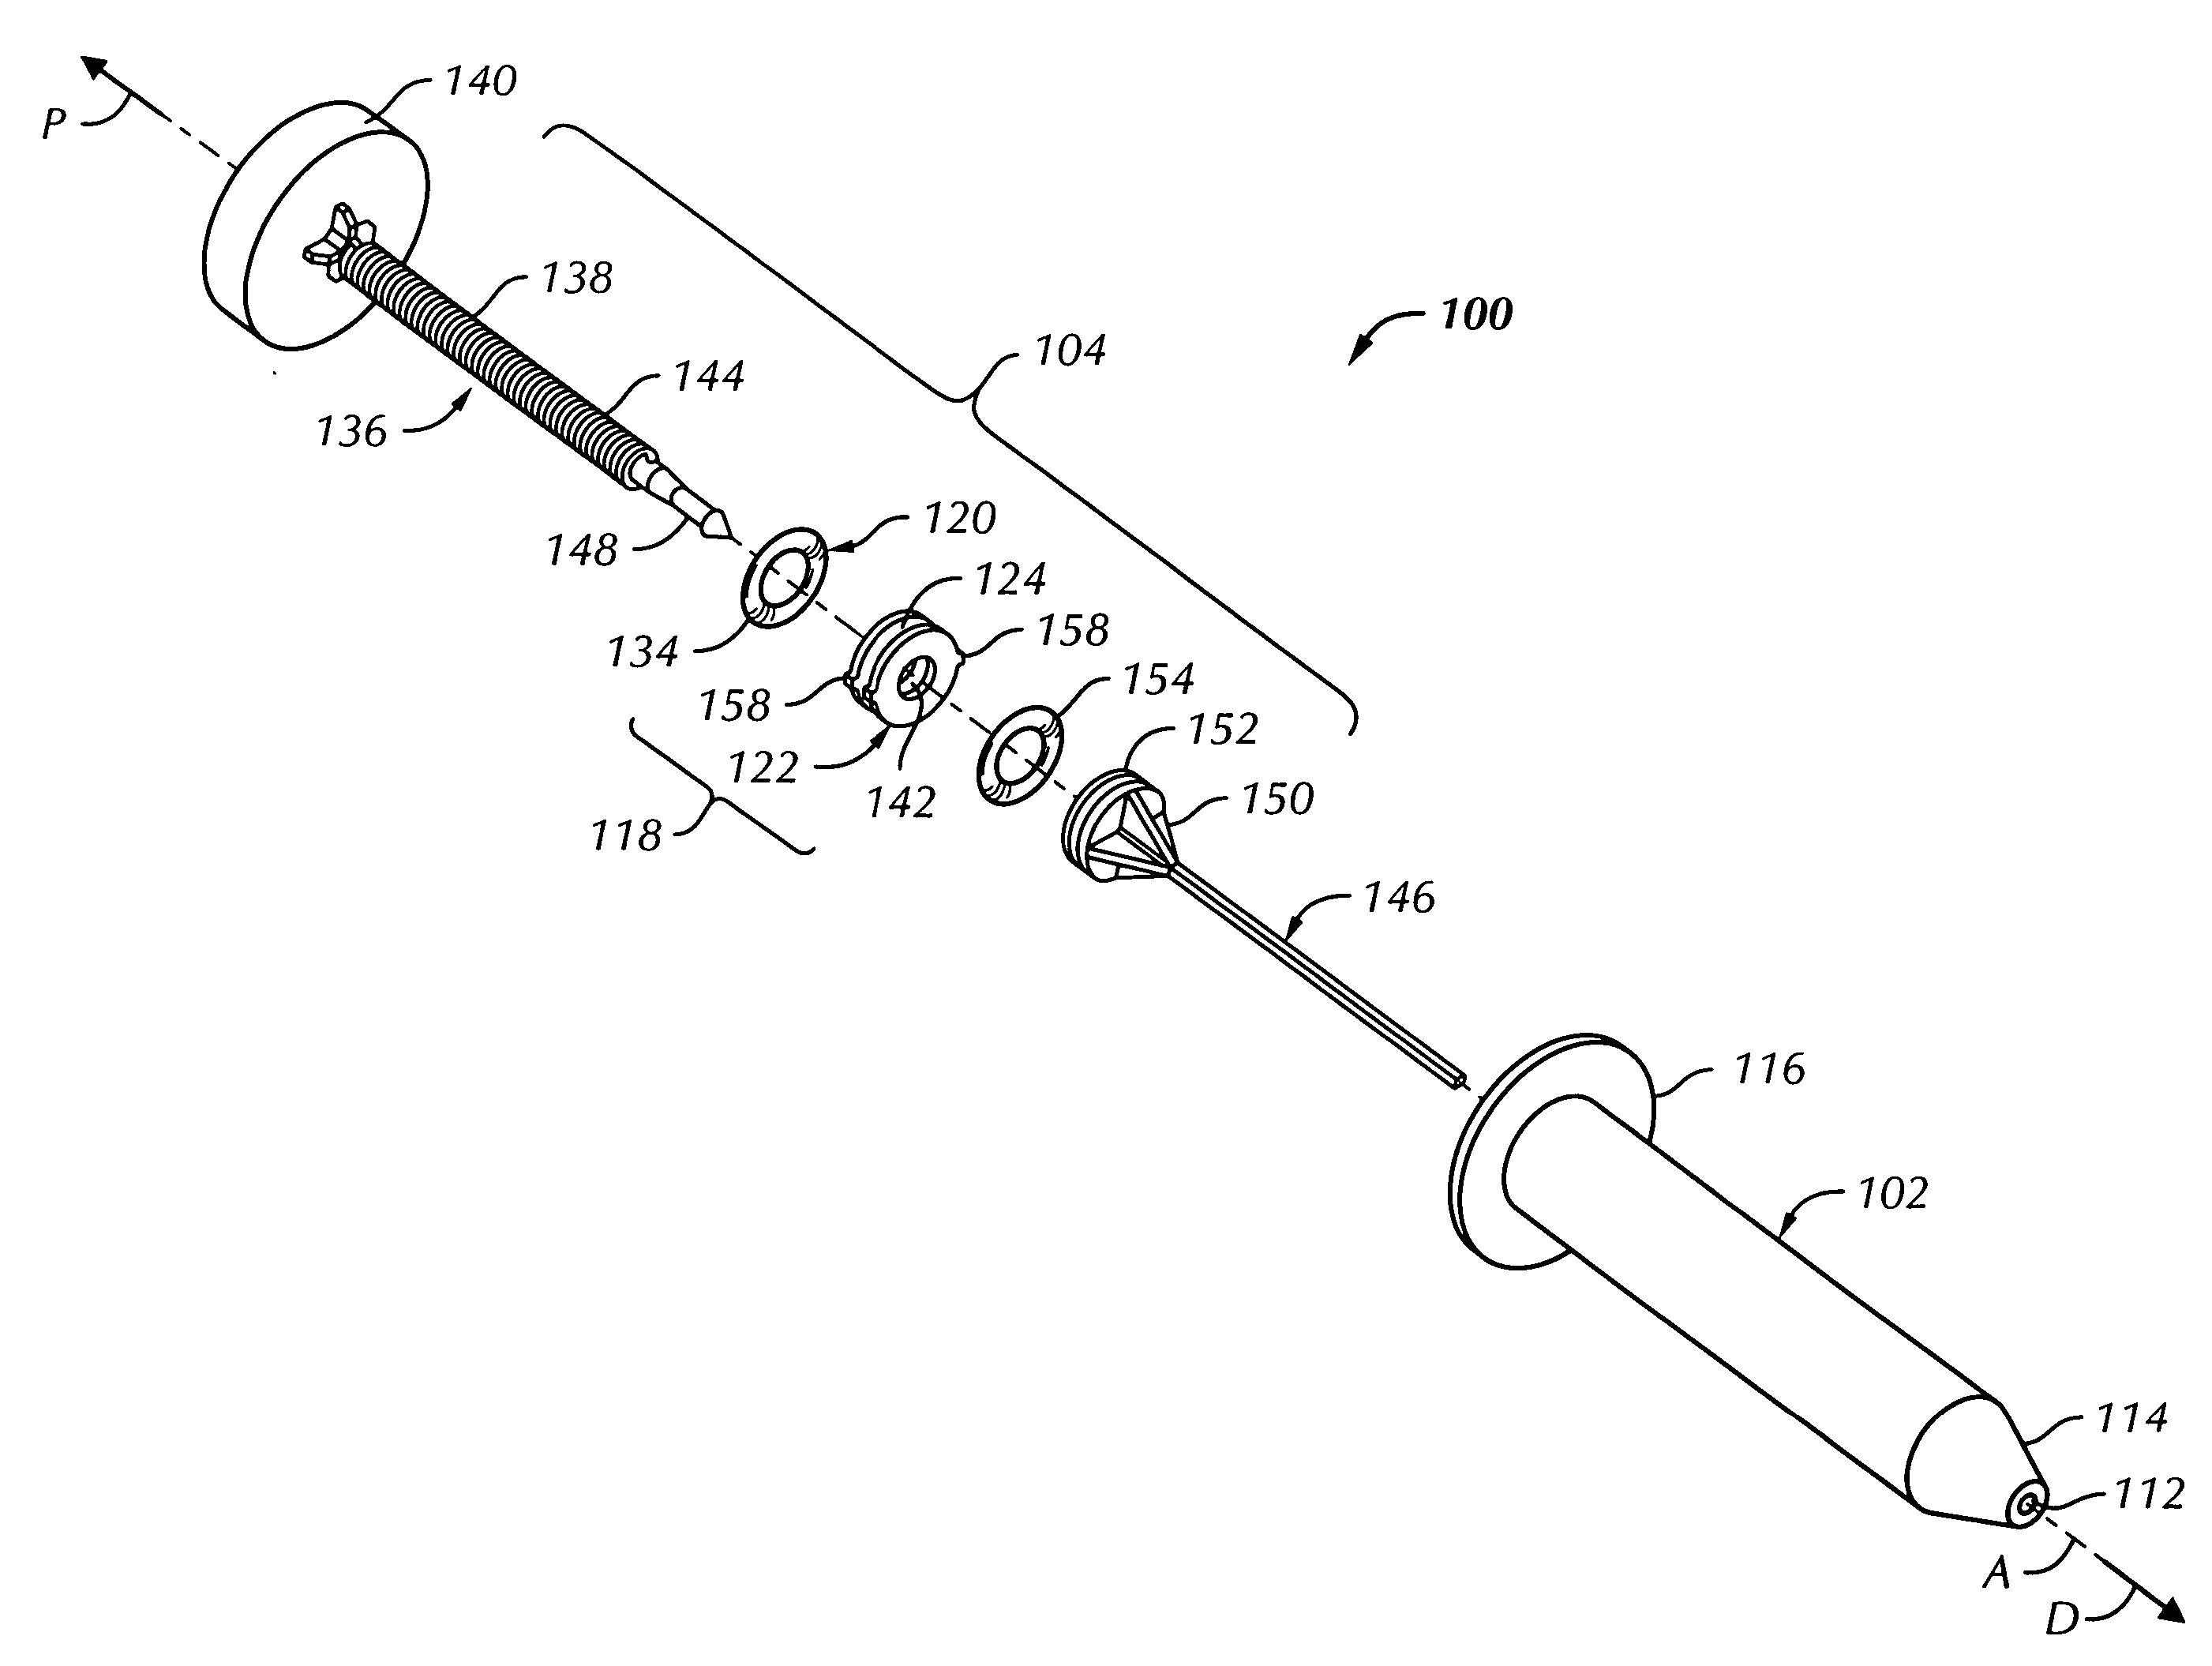 Multi-action device for inserting an intraocular lens into an eye